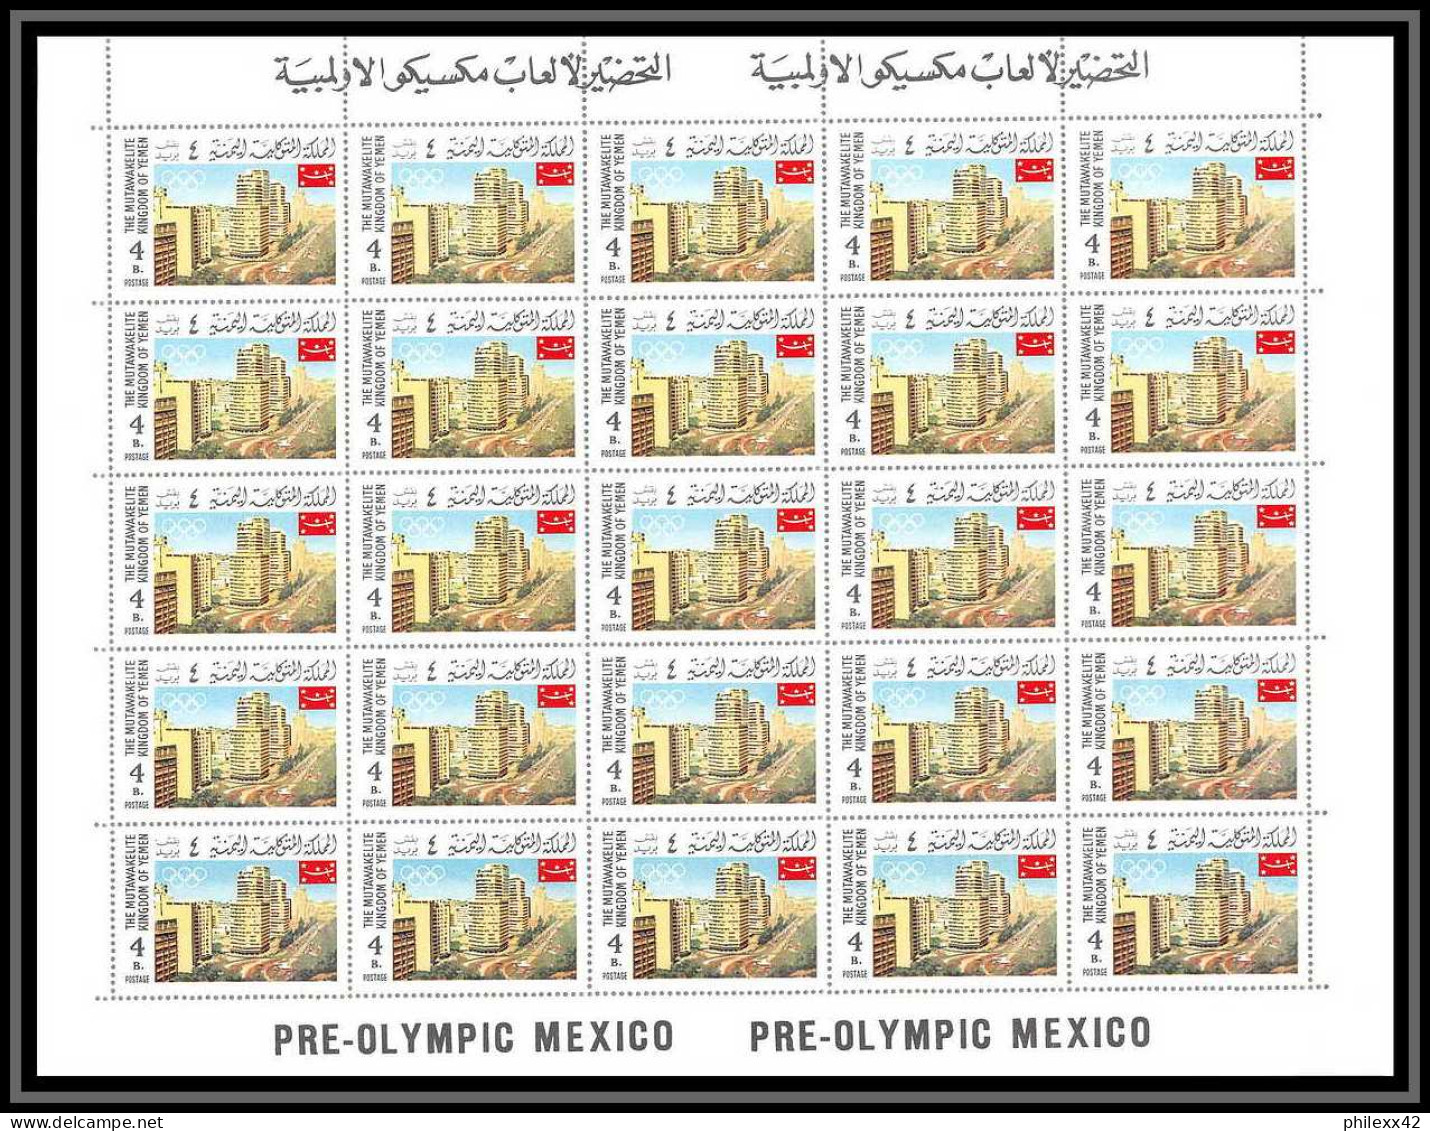 172e Yemen kingdom MNH ** N° 403 / 410 A jeux olympiques (summer olympic games) Mexico 68 (Soccer) feuilles sheets